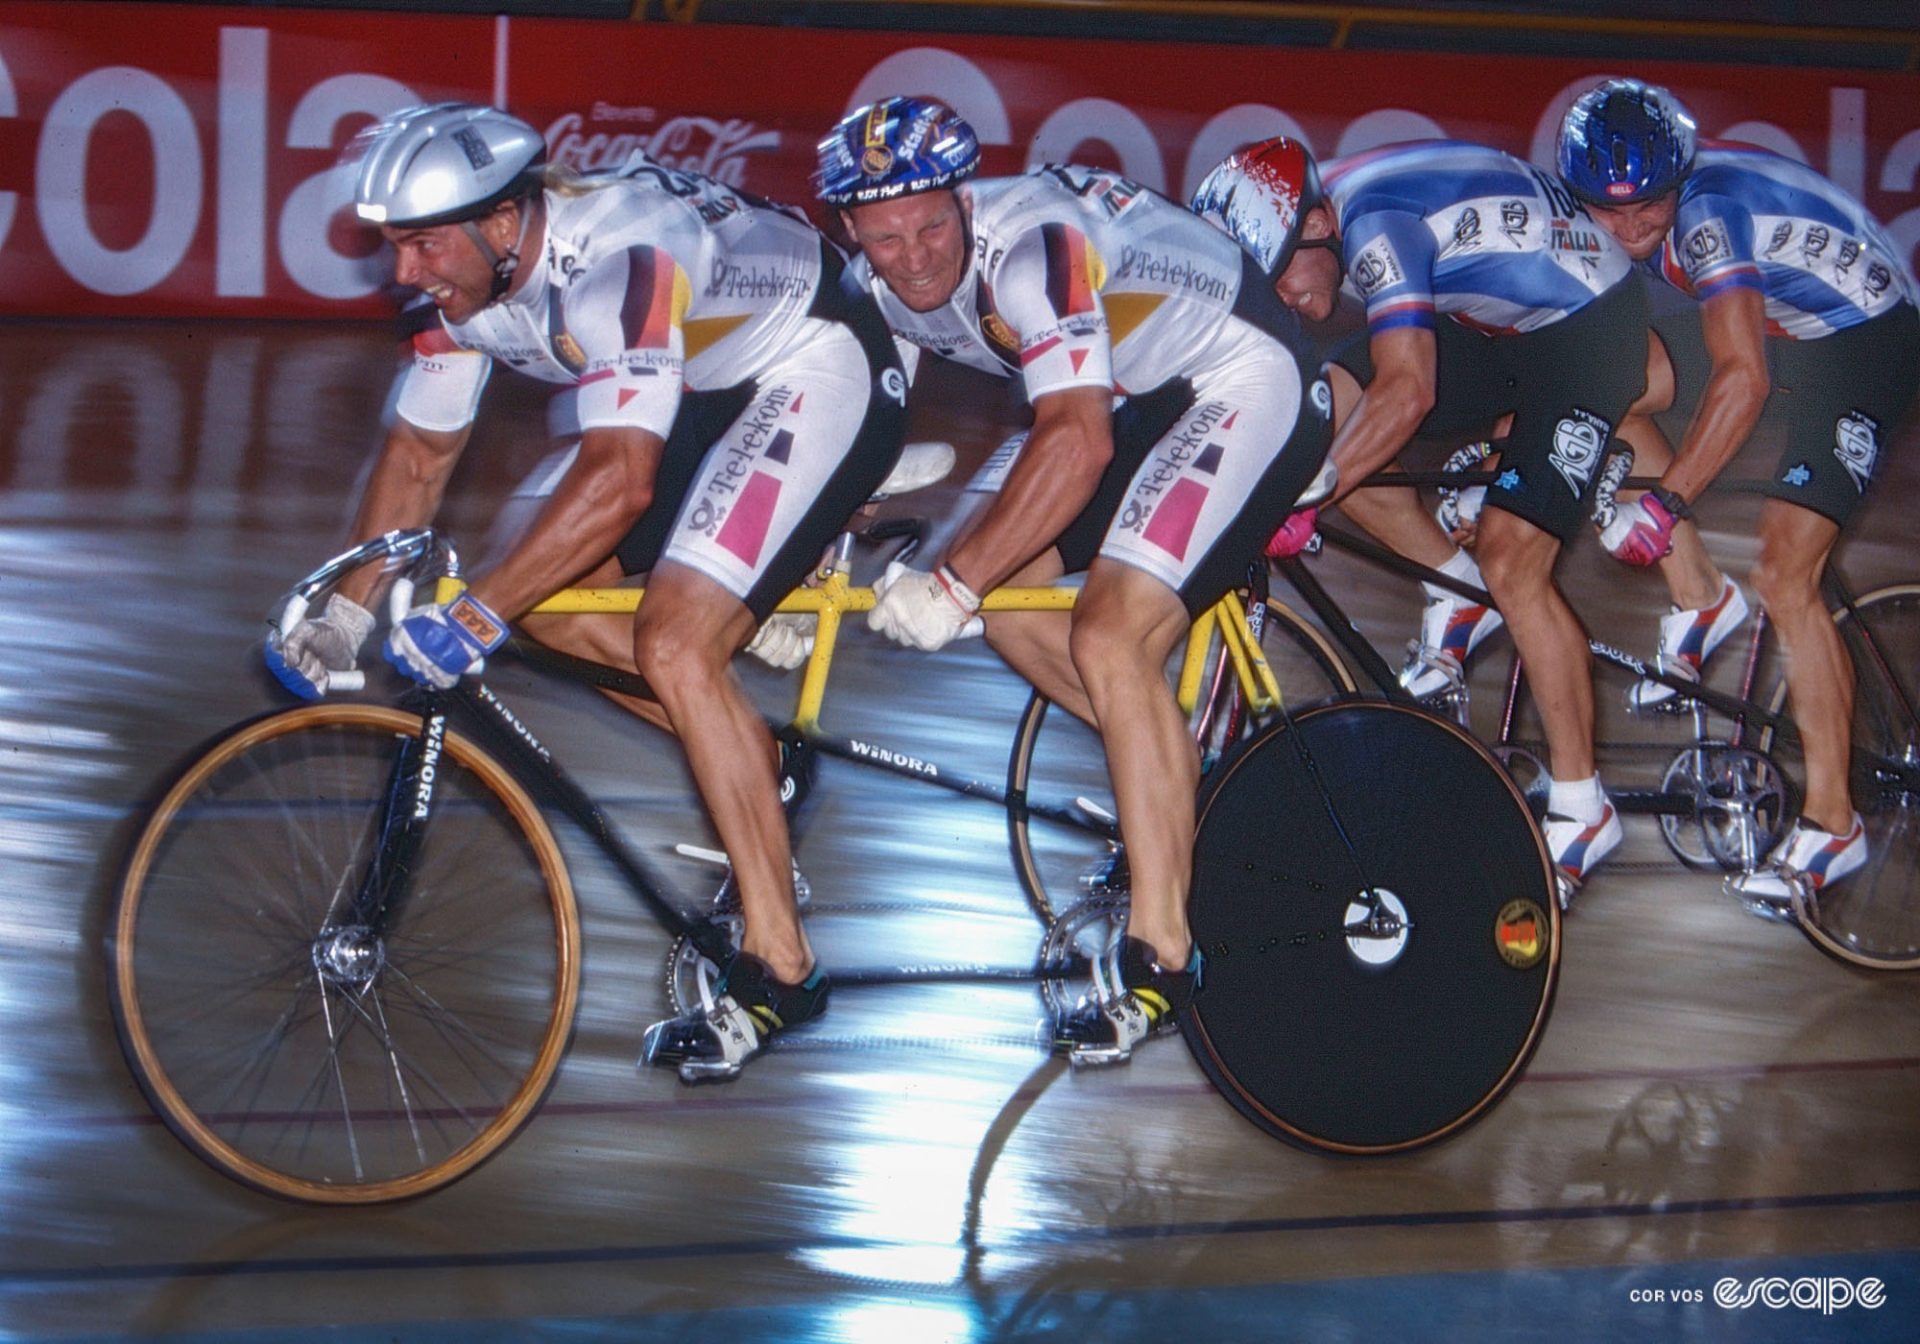 Two teams of tandem riders, both grimacing enormously and pushing with enormous effort.